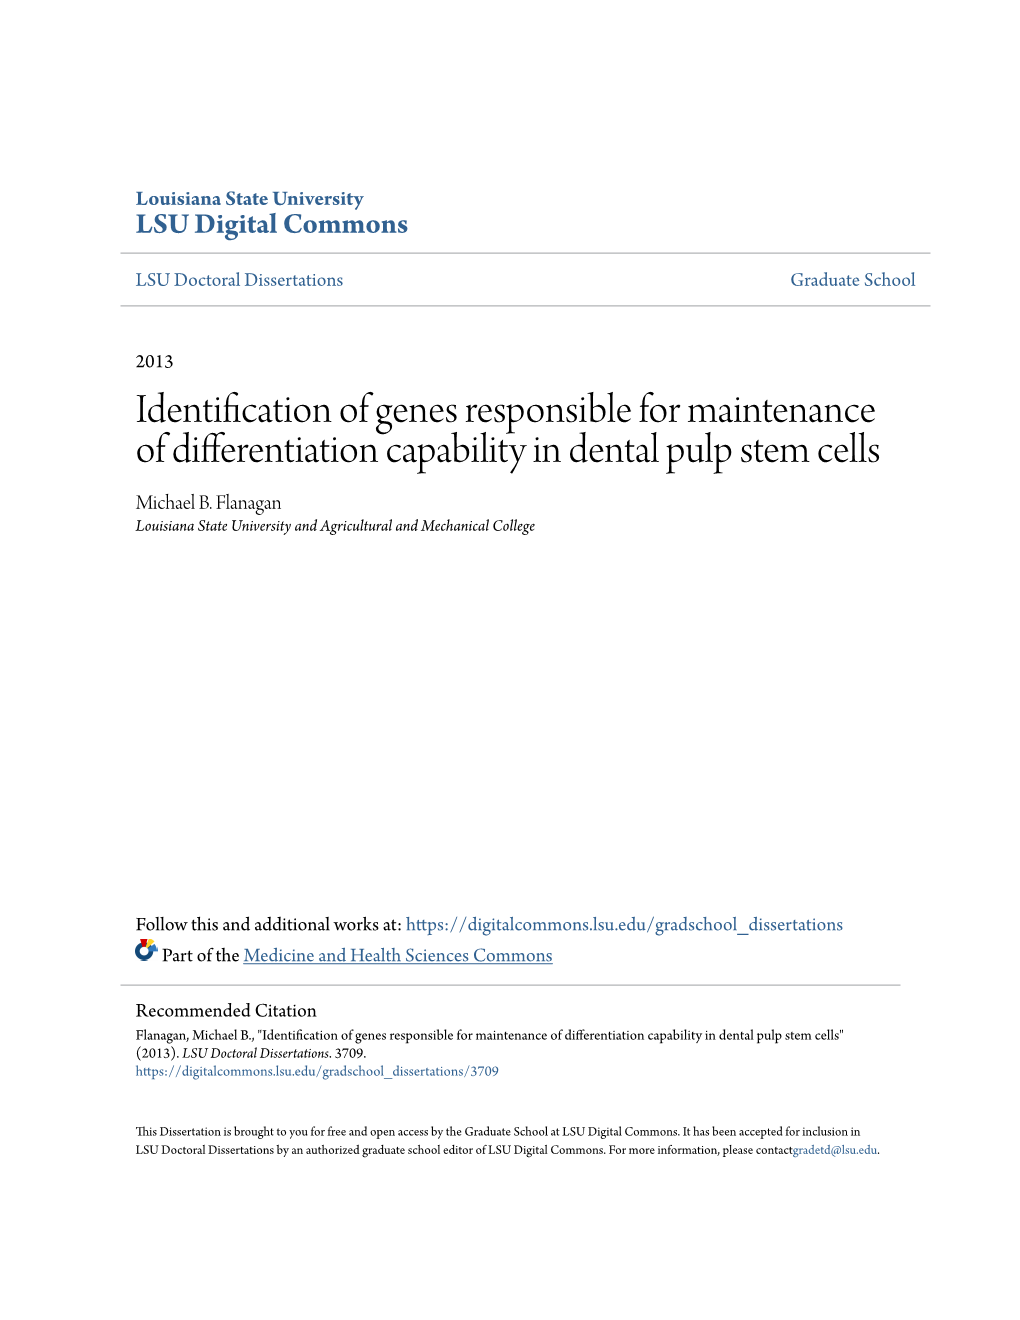 Identification of Genes Responsible for Maintenance of Differentiation Capability in Dental Pulp Stem Cells Michael B